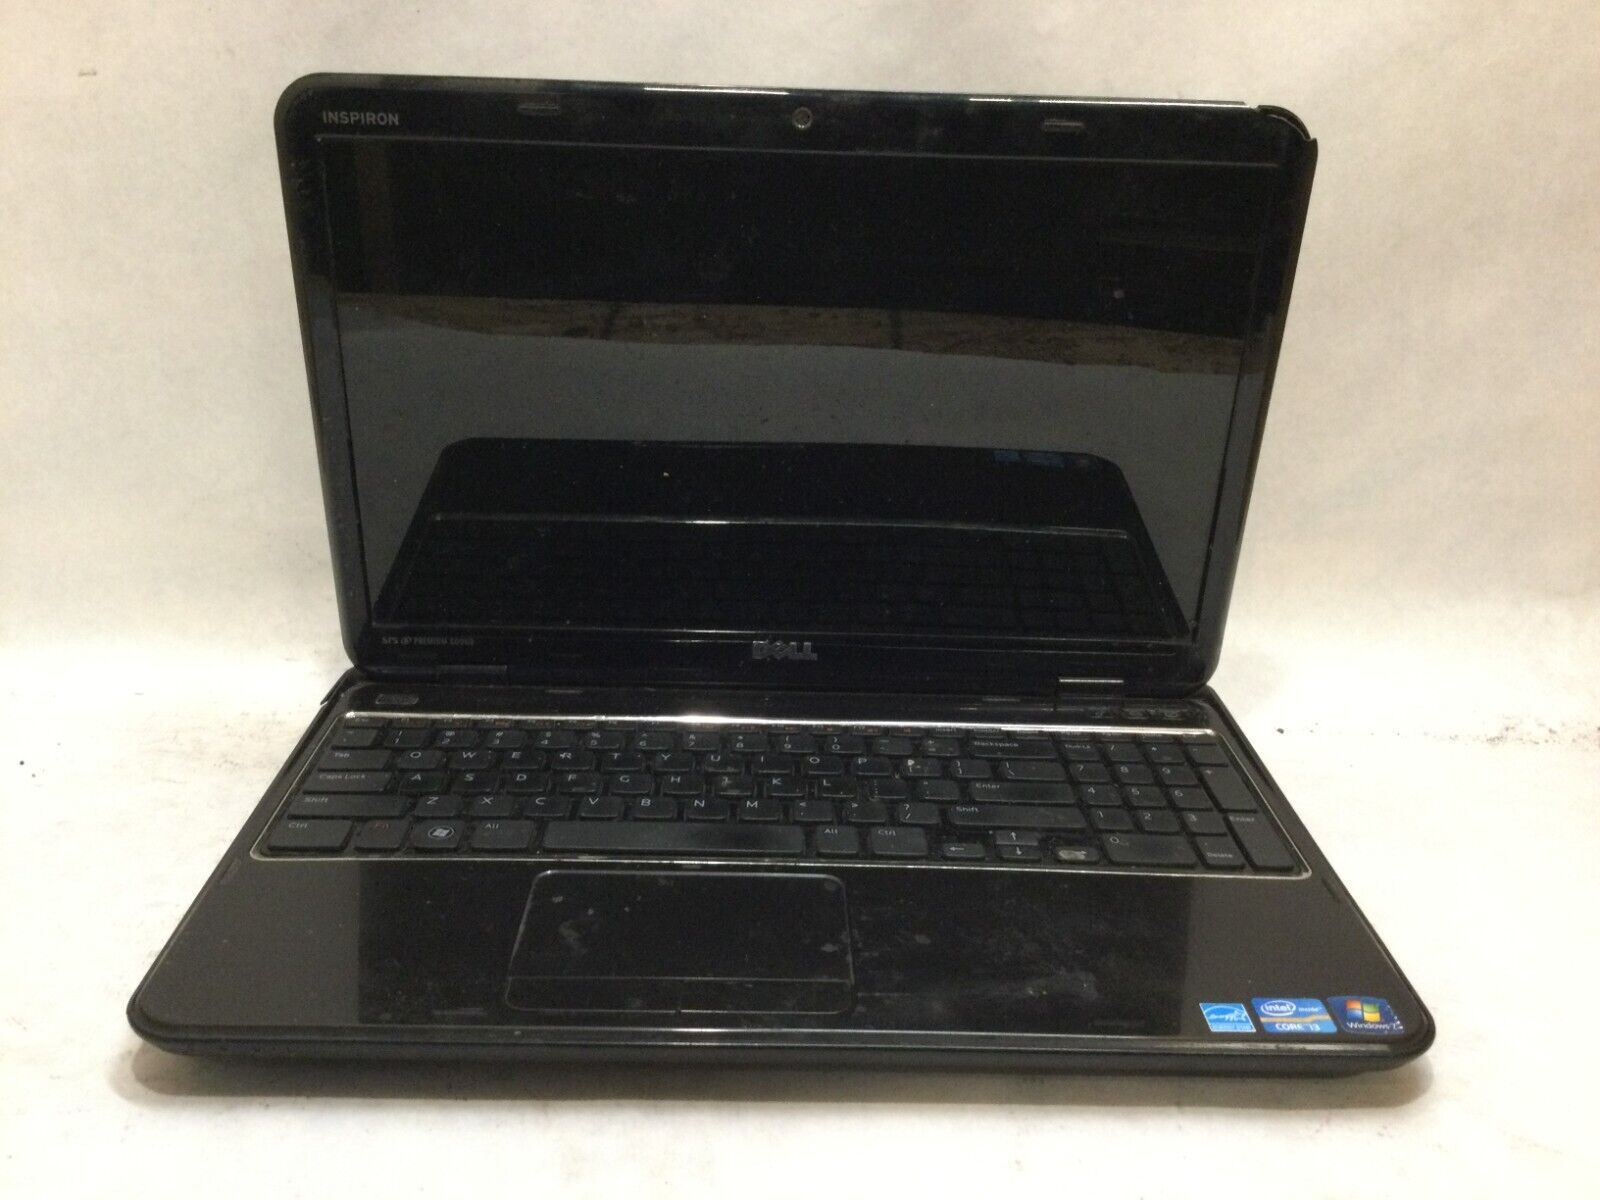 Dell Inspiron N5110 / Intel Core i5-2430M / (DOES NOT POWER ON) MR